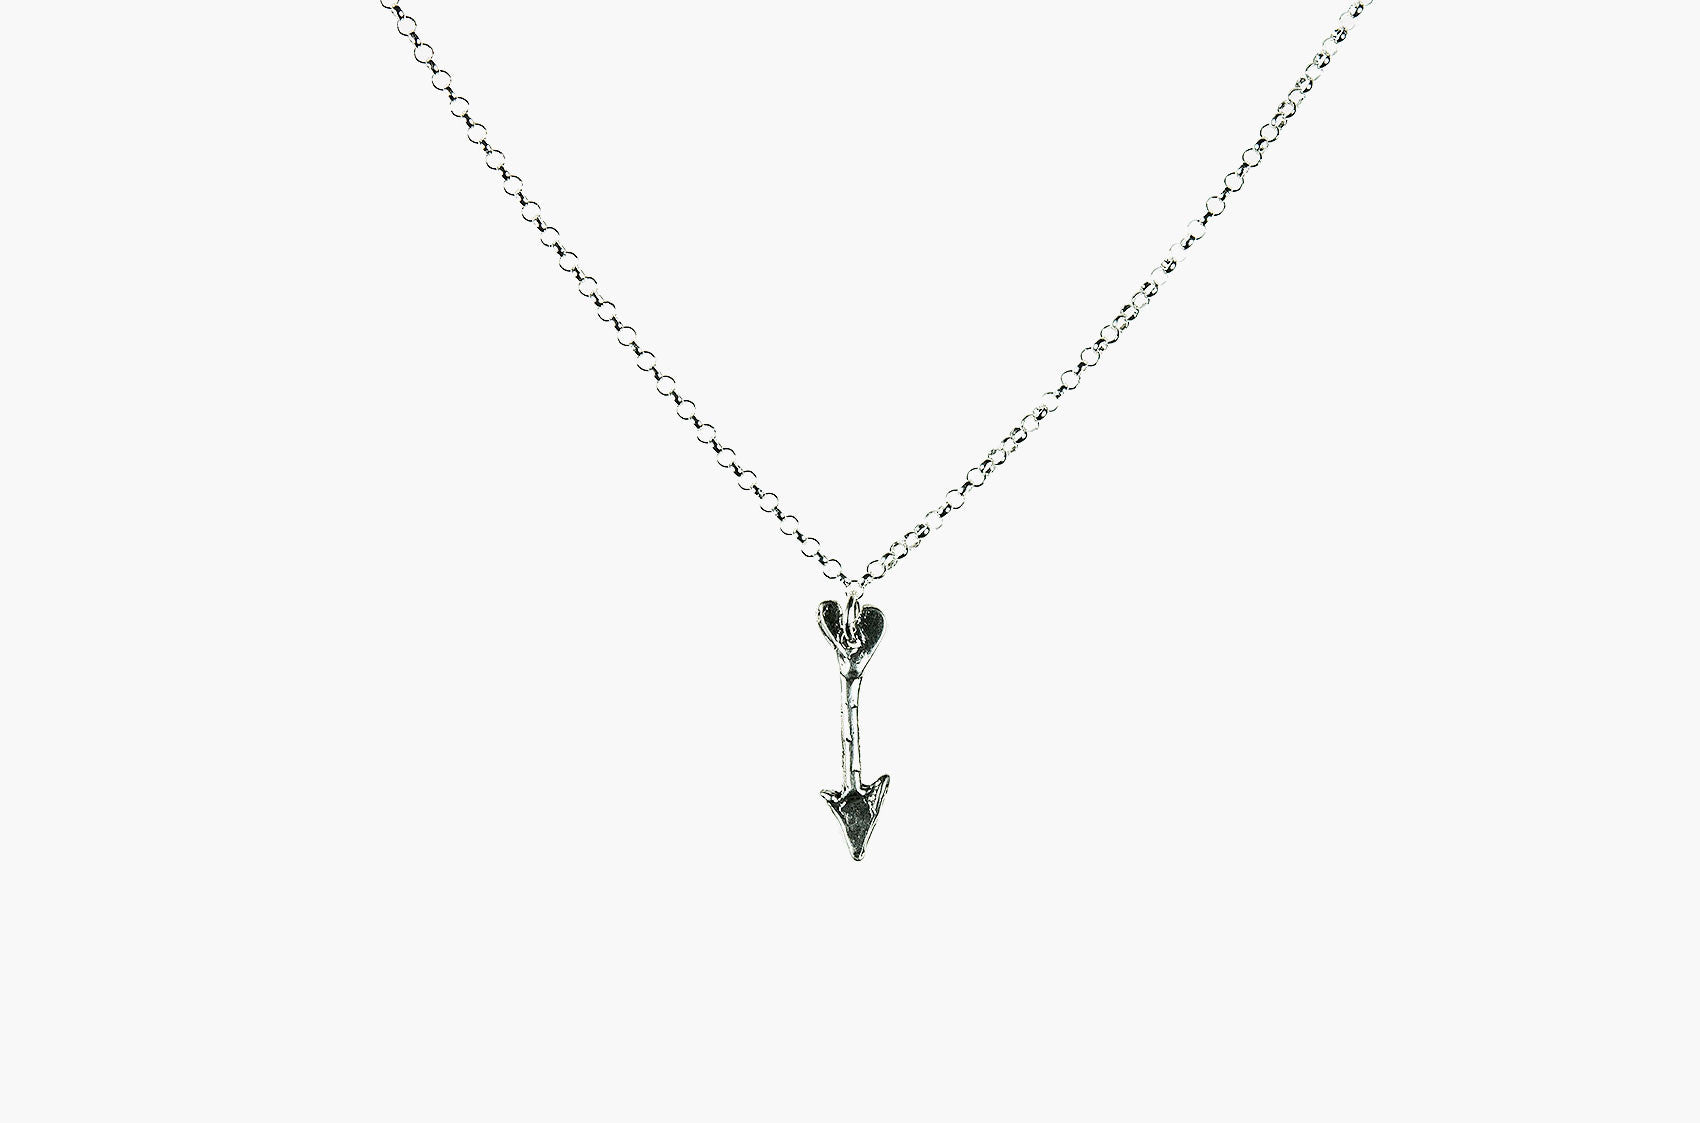 Rustic artisan arrow necklace in sterling silver